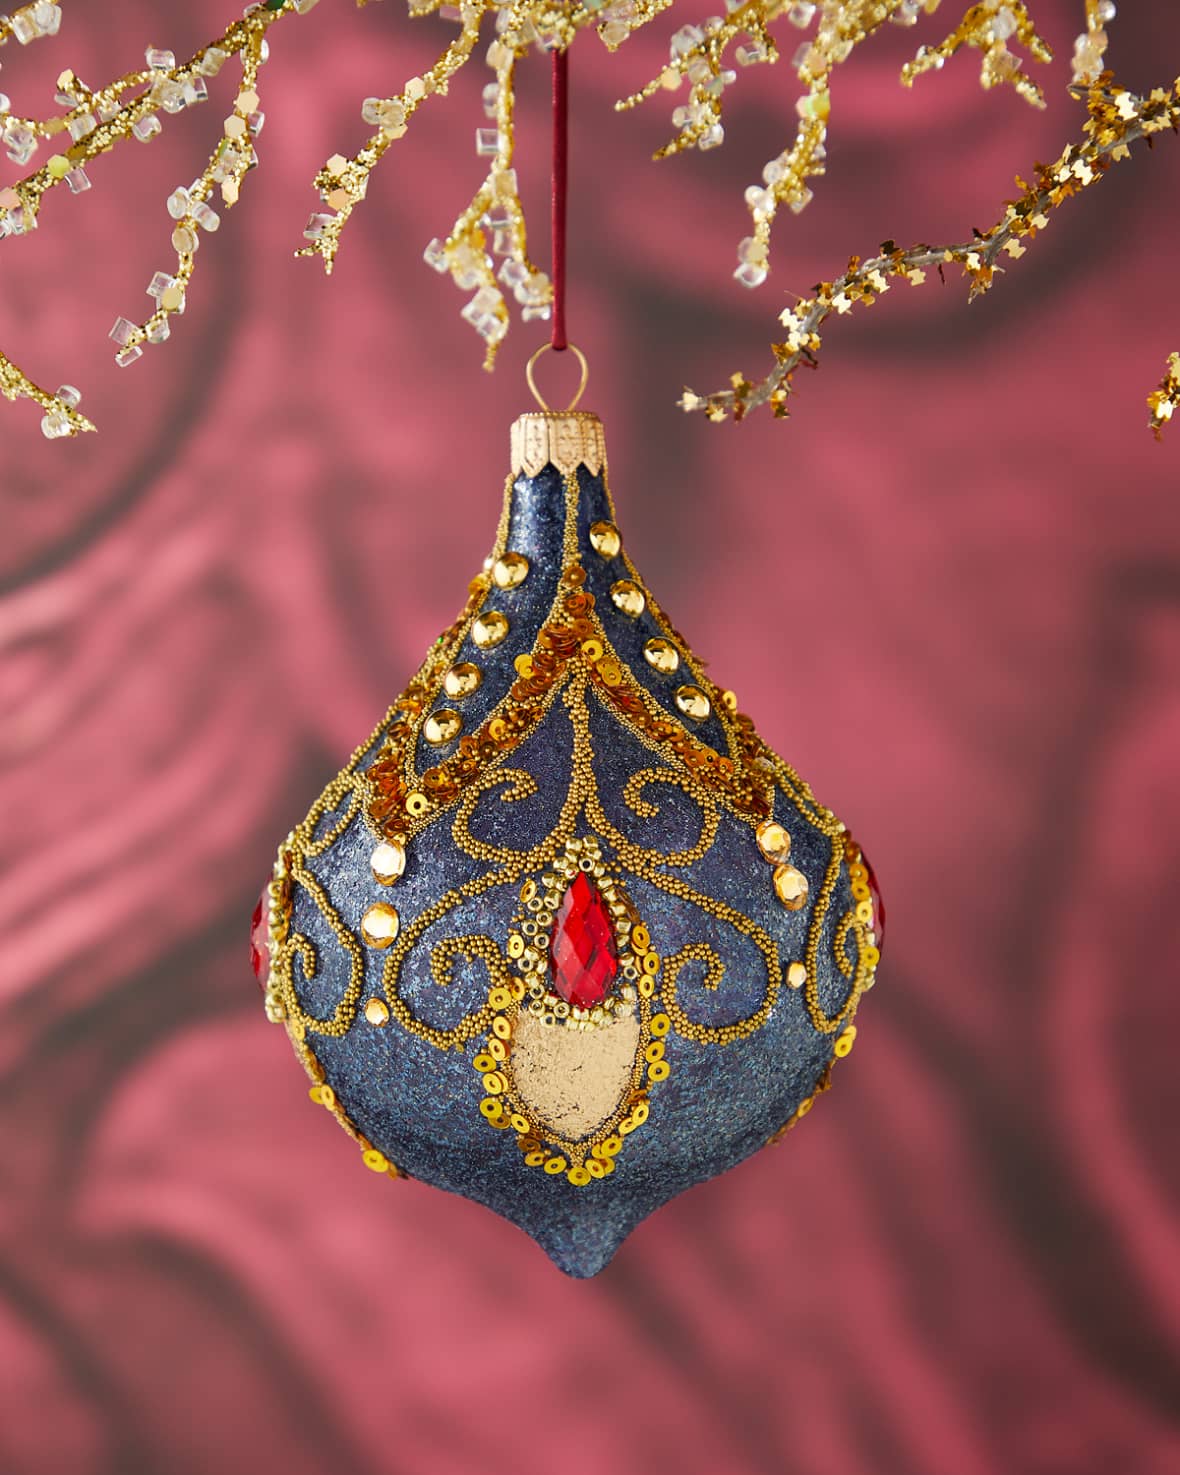 13cm Drop Blue Glittered With Gold And Red Gems Christmas Ornament 0